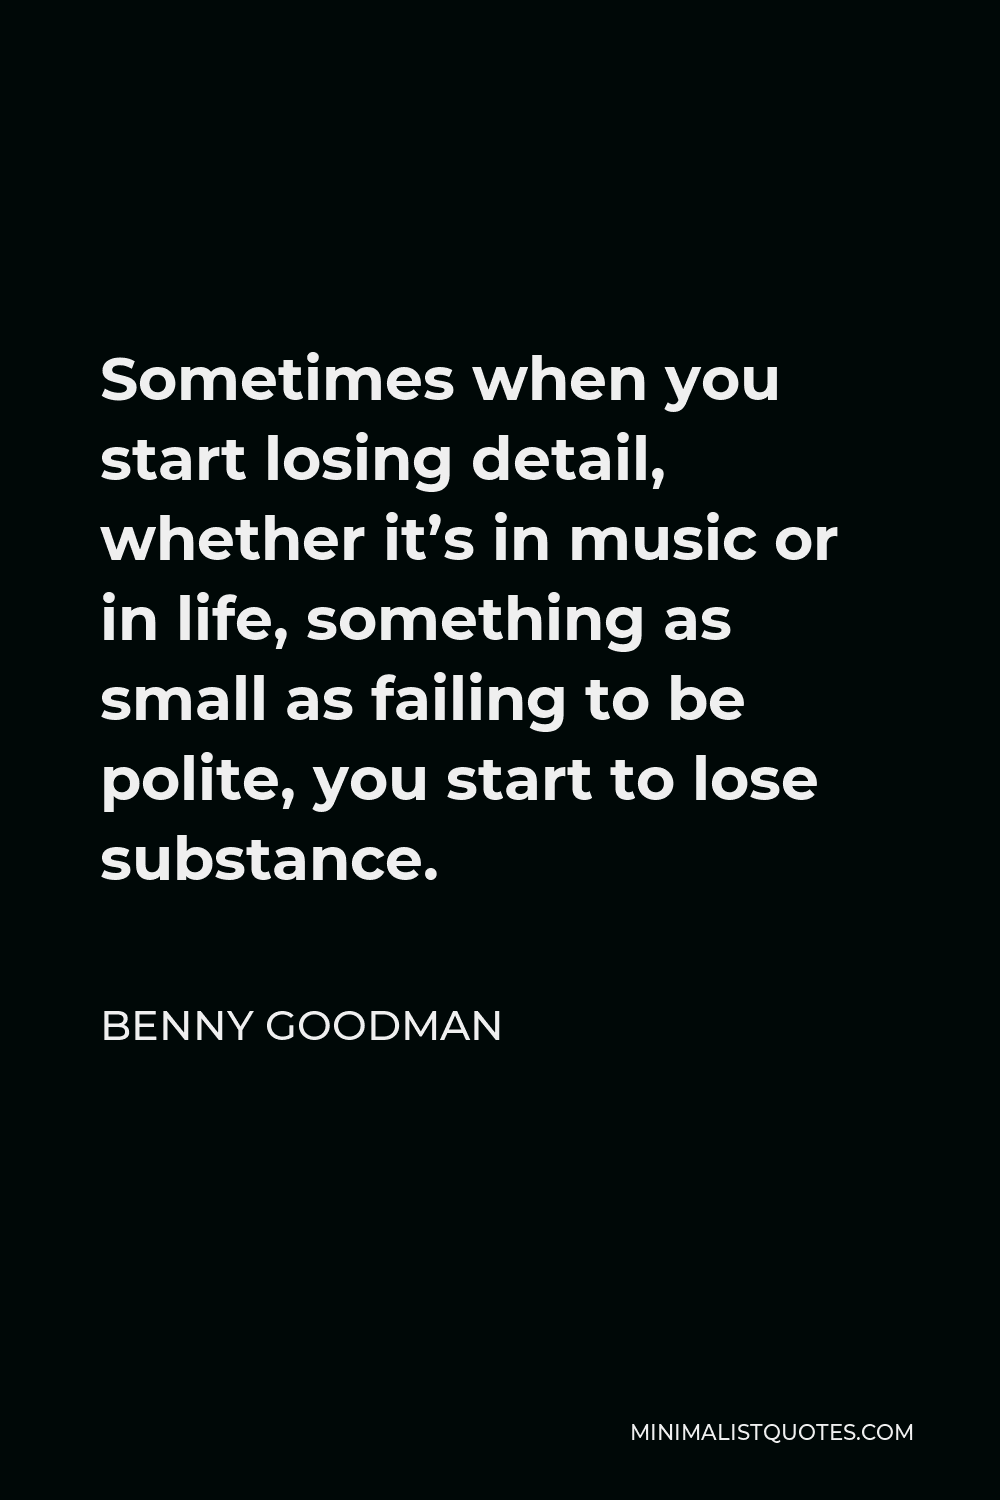 Benny Goodman Quote - Sometimes when you start losing detail, whether it’s in music or in life, something as small as failing to be polite, you start to lose substance.